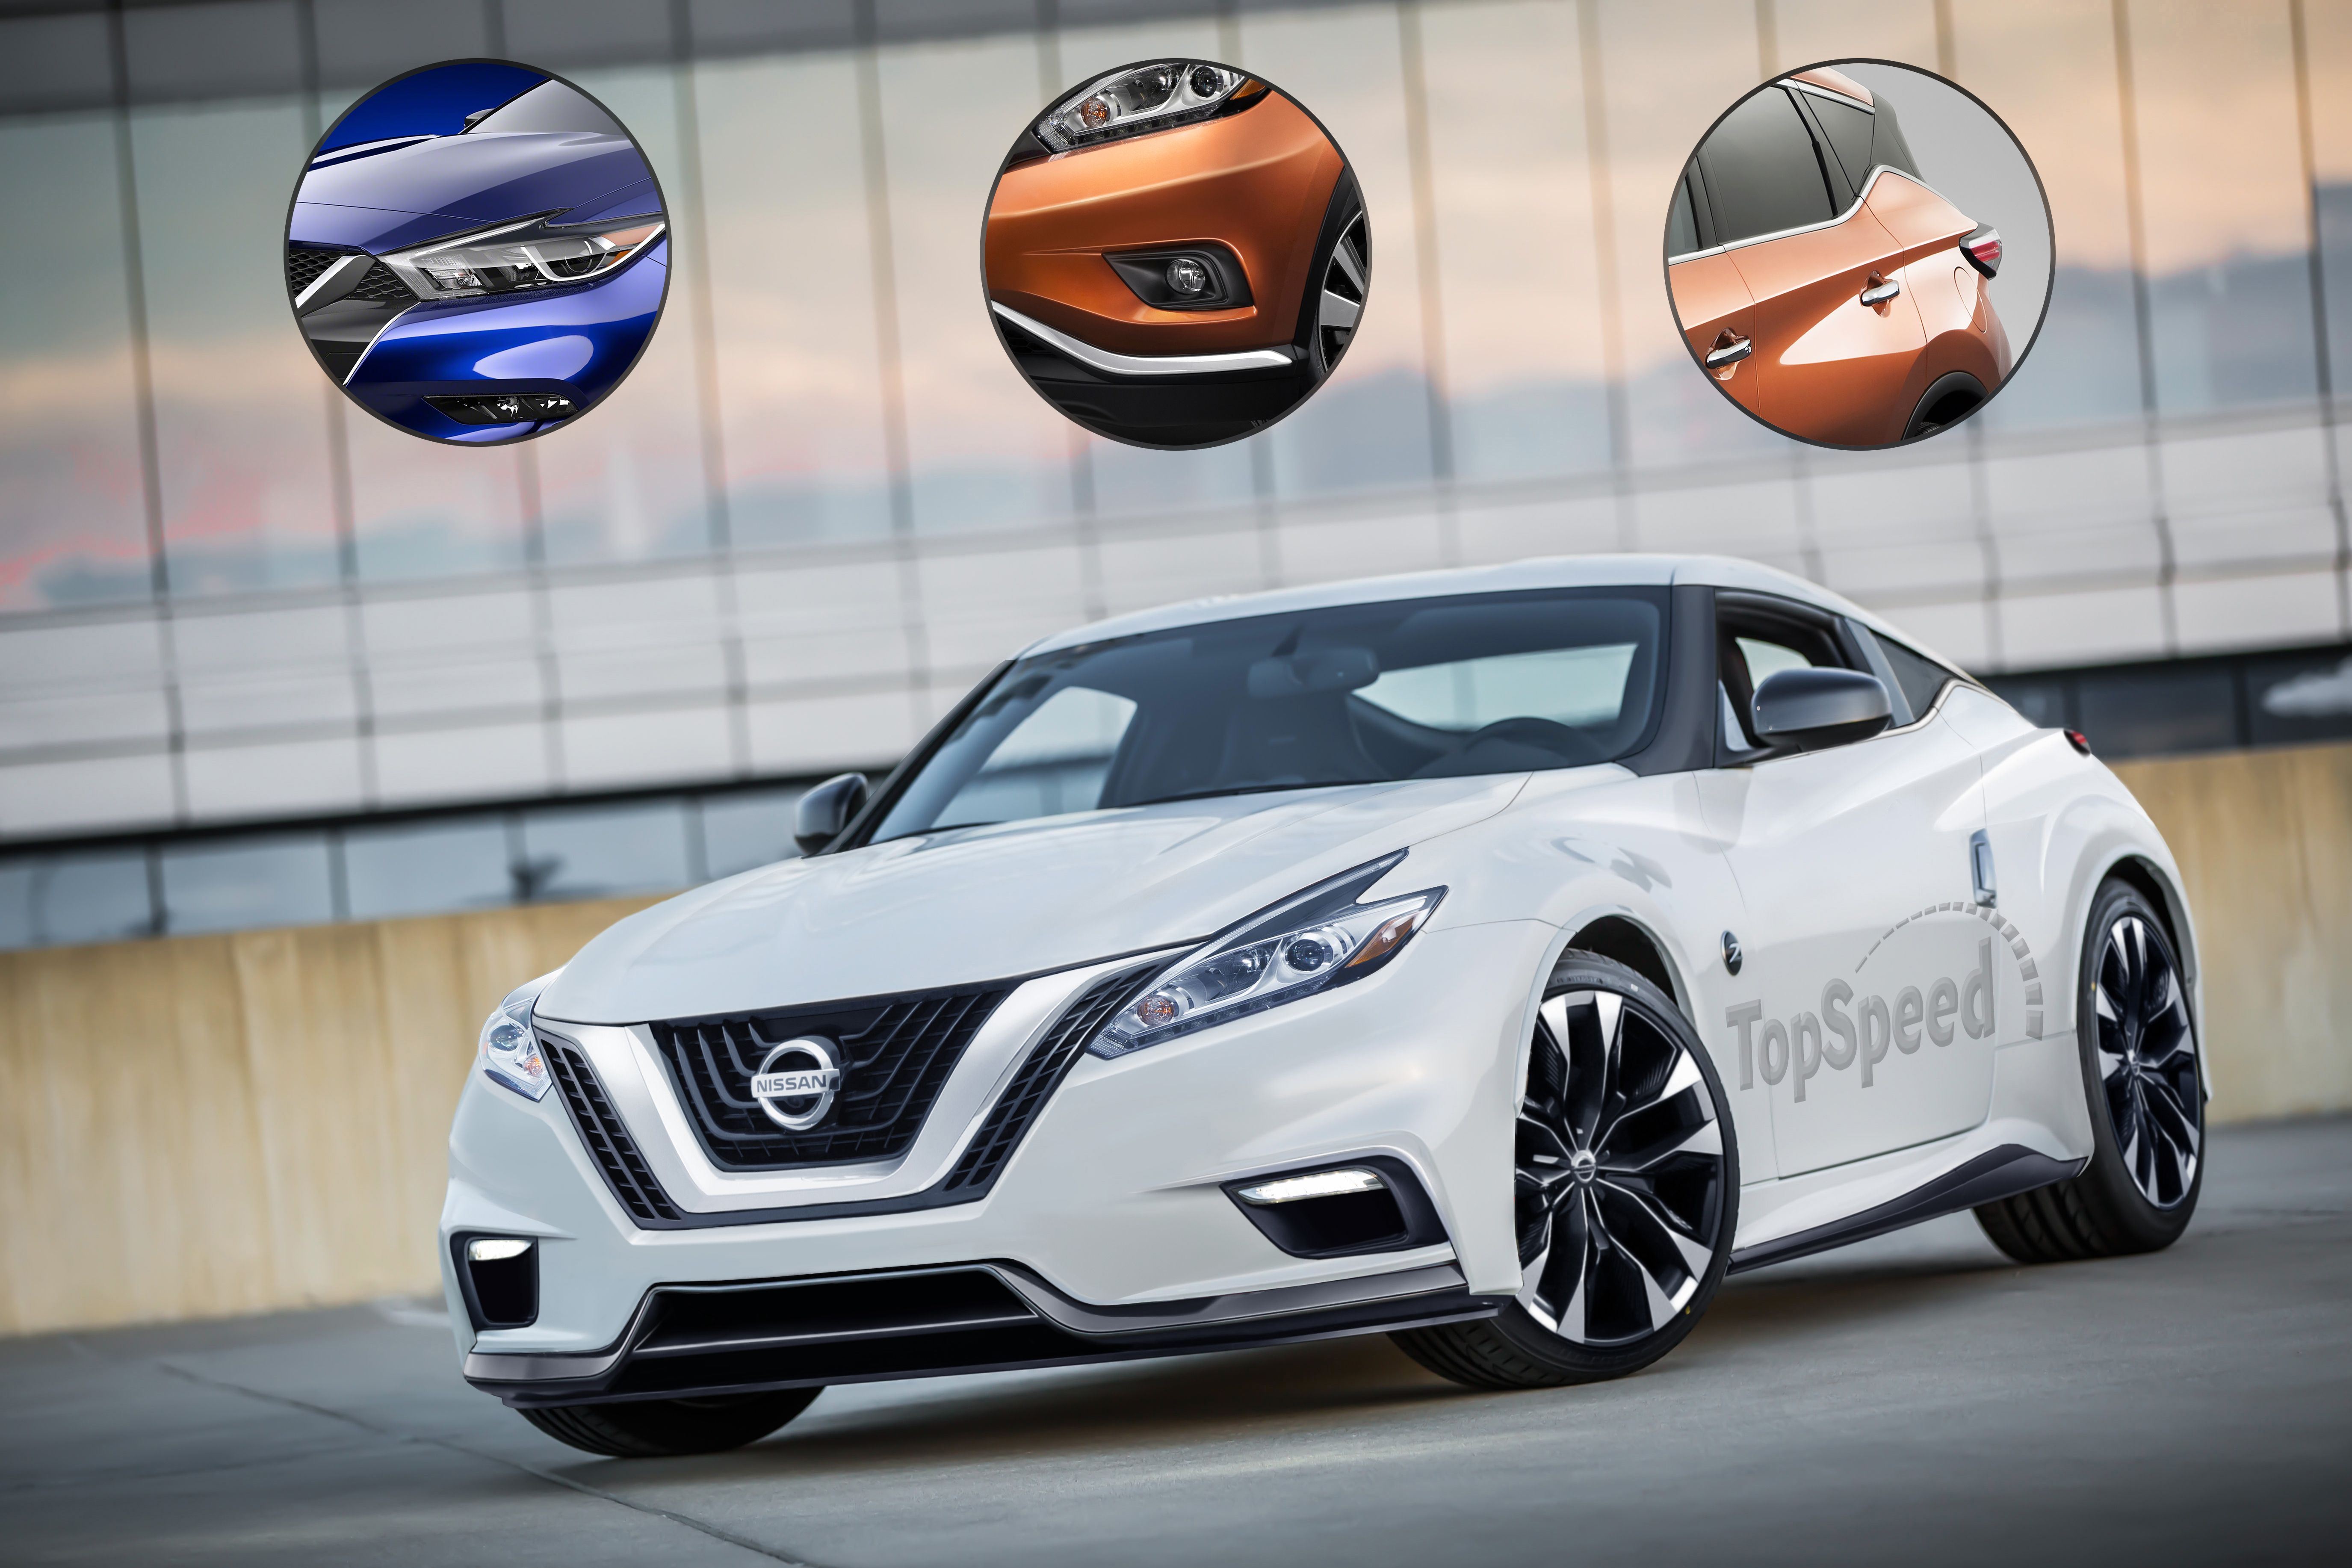 2020 A New Trademark Hints that the 2021 Nissan 400Z Is Coming Sooner Than Expected